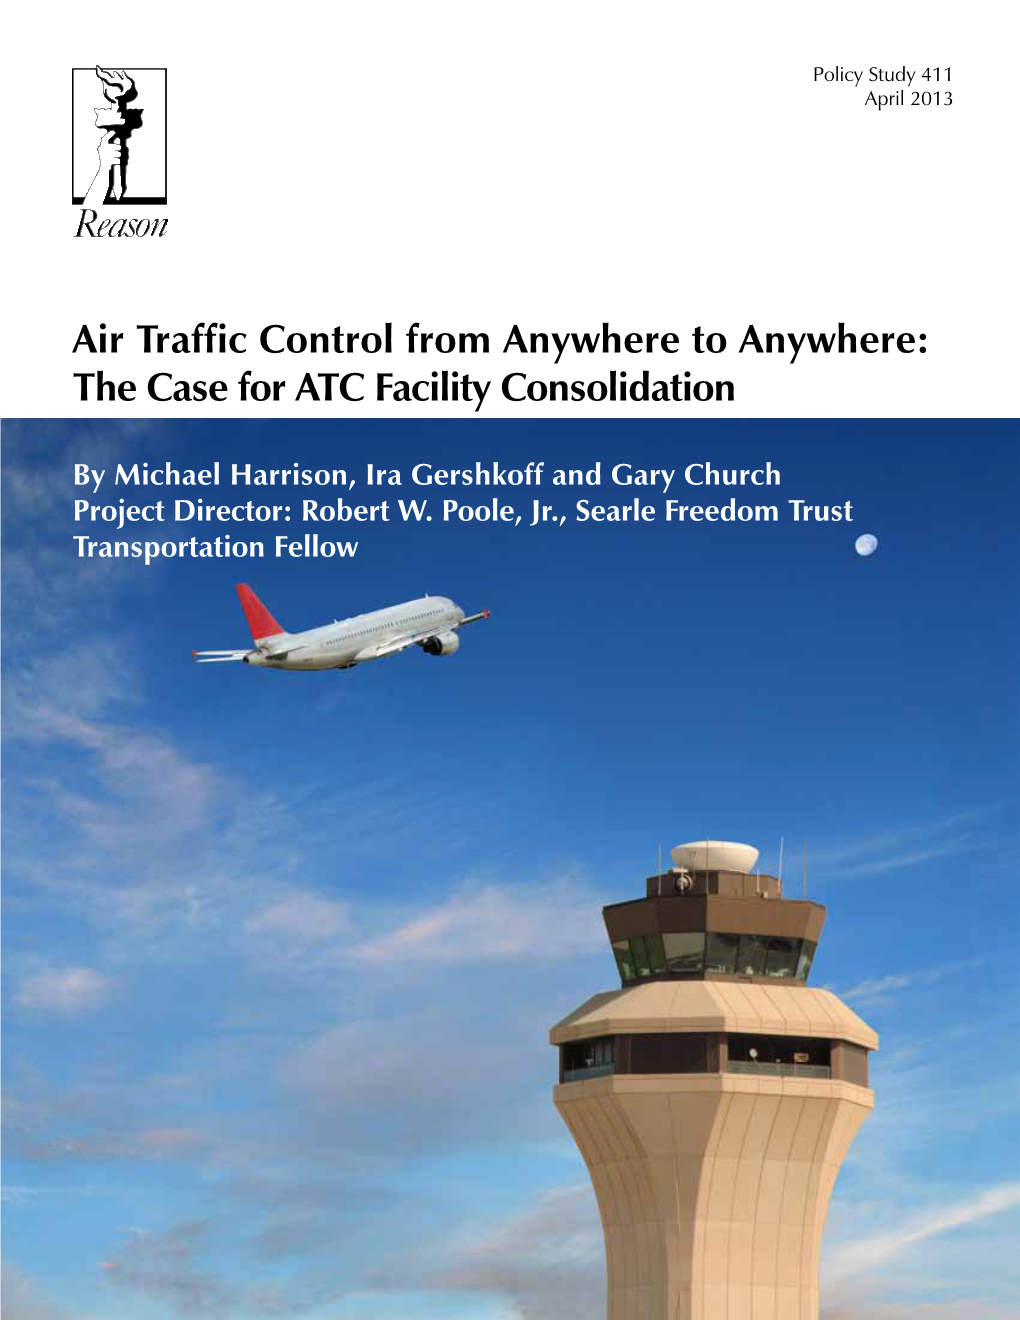 The Case for ATC Facility Consolidation